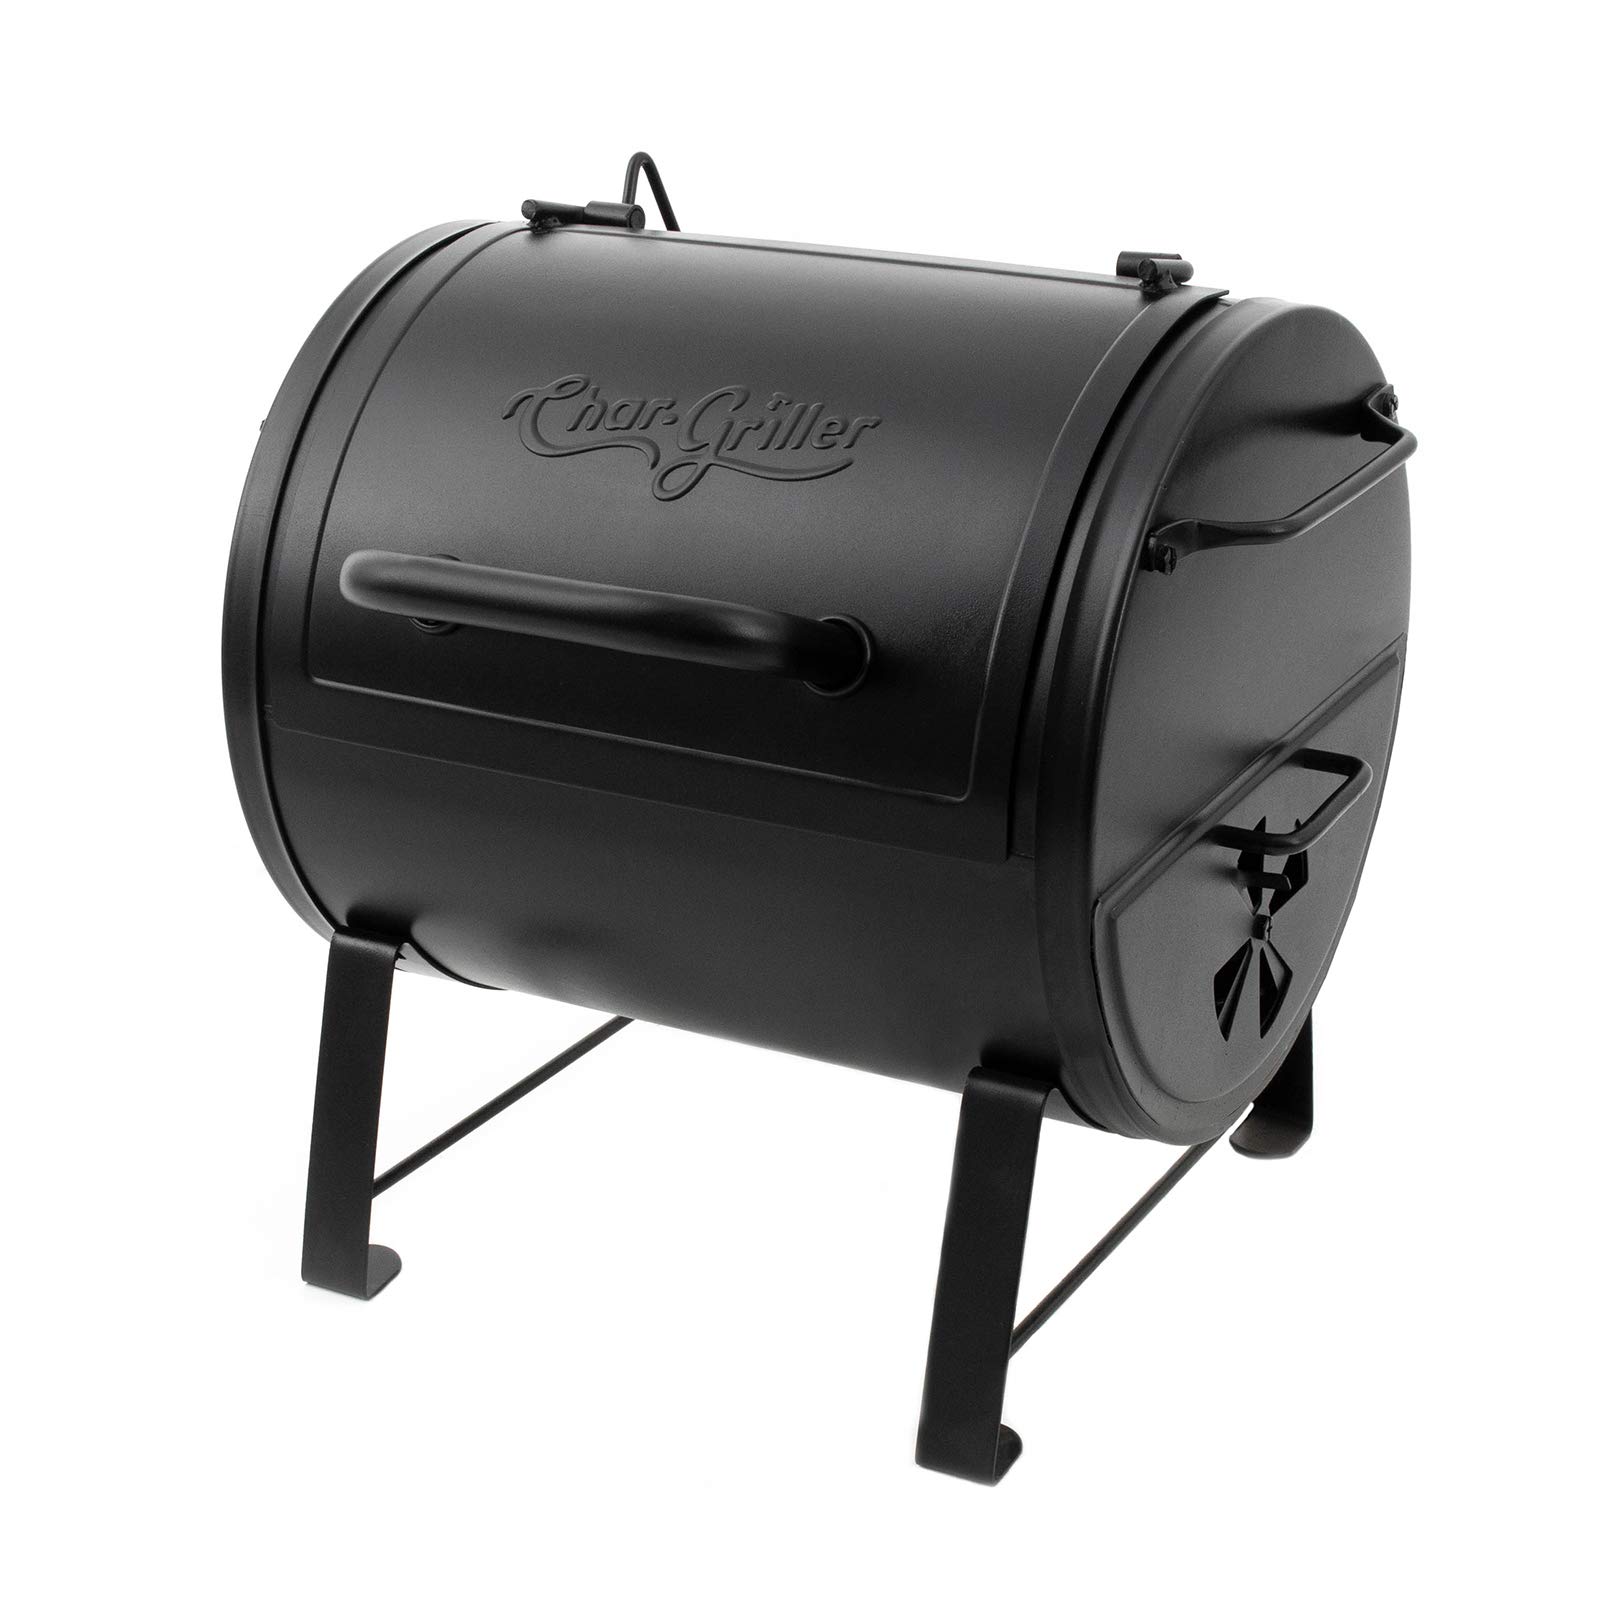 Char-Griller E82424 Smoker Side Fire Box Portable Charcoal Grill, Black